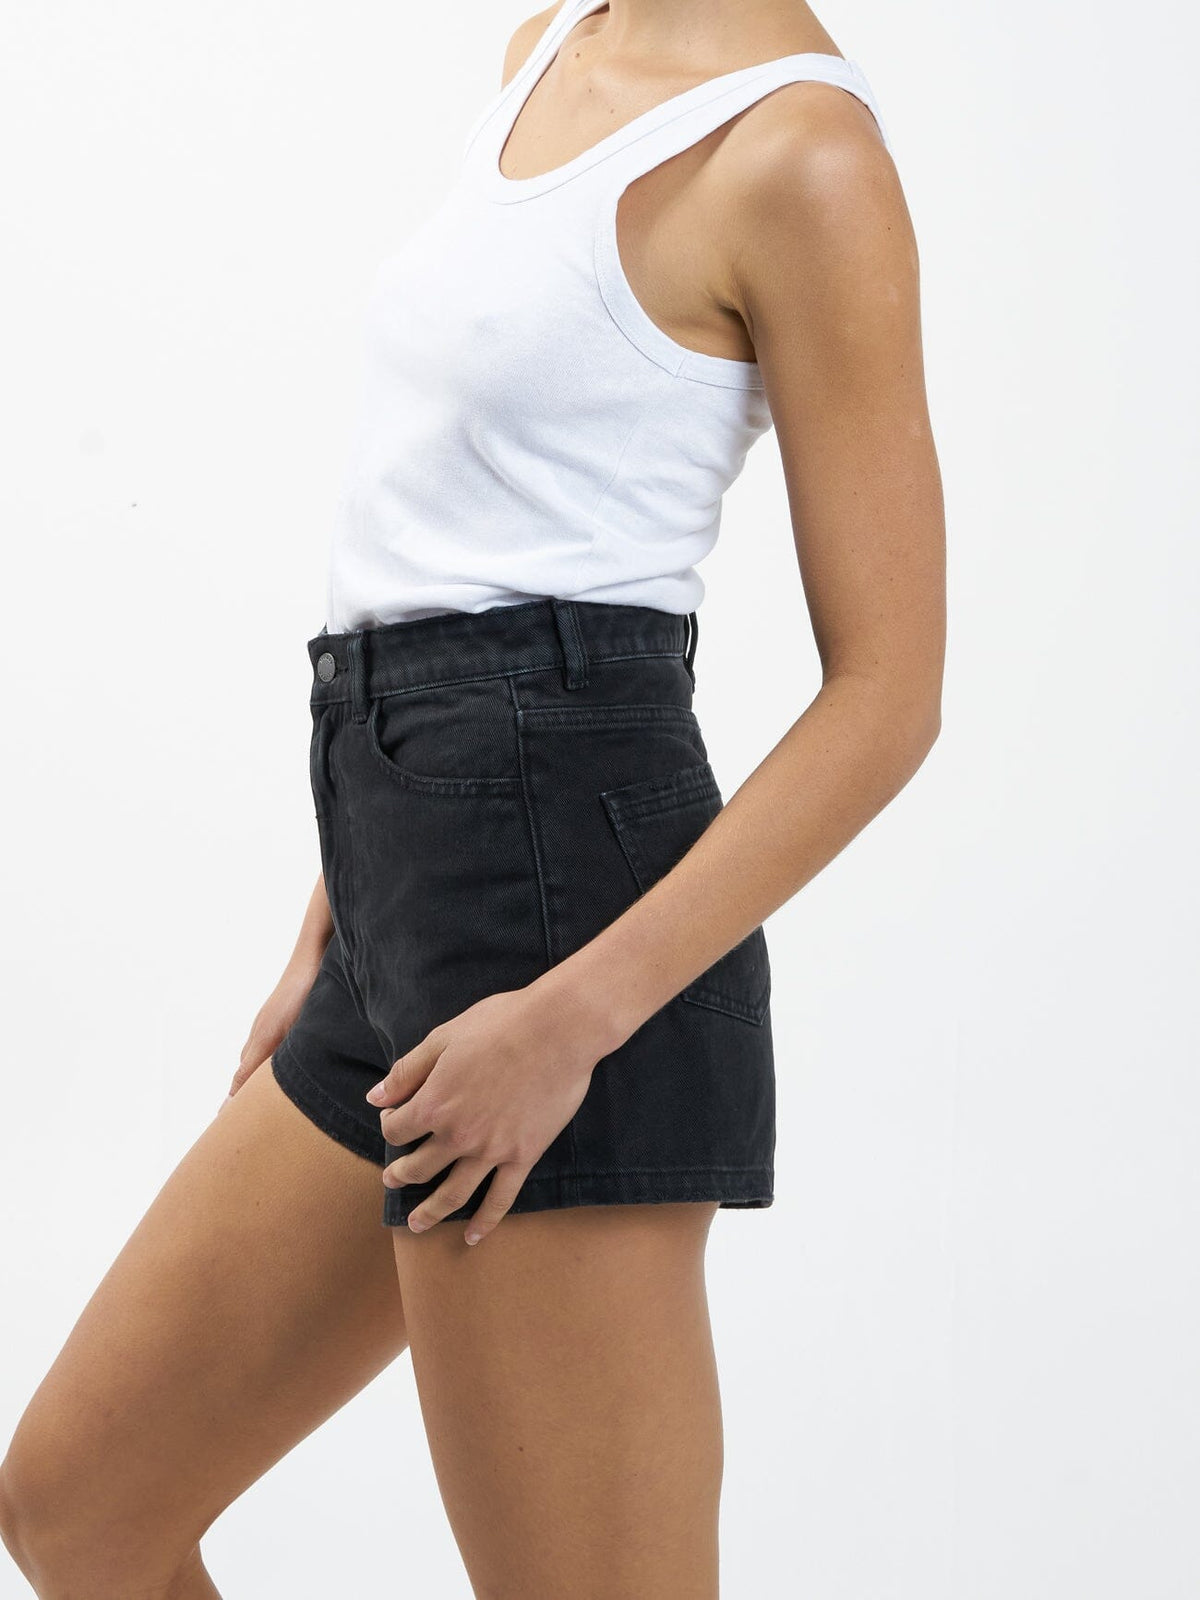 These are the go to denim shorts that will end your quest for the perfect pair. Not too long, not too short and a super flattering fit, these shorts are literally just right. Relaxed and comfy, you will thank yourself later. We promise. 100% Organic Cotton.